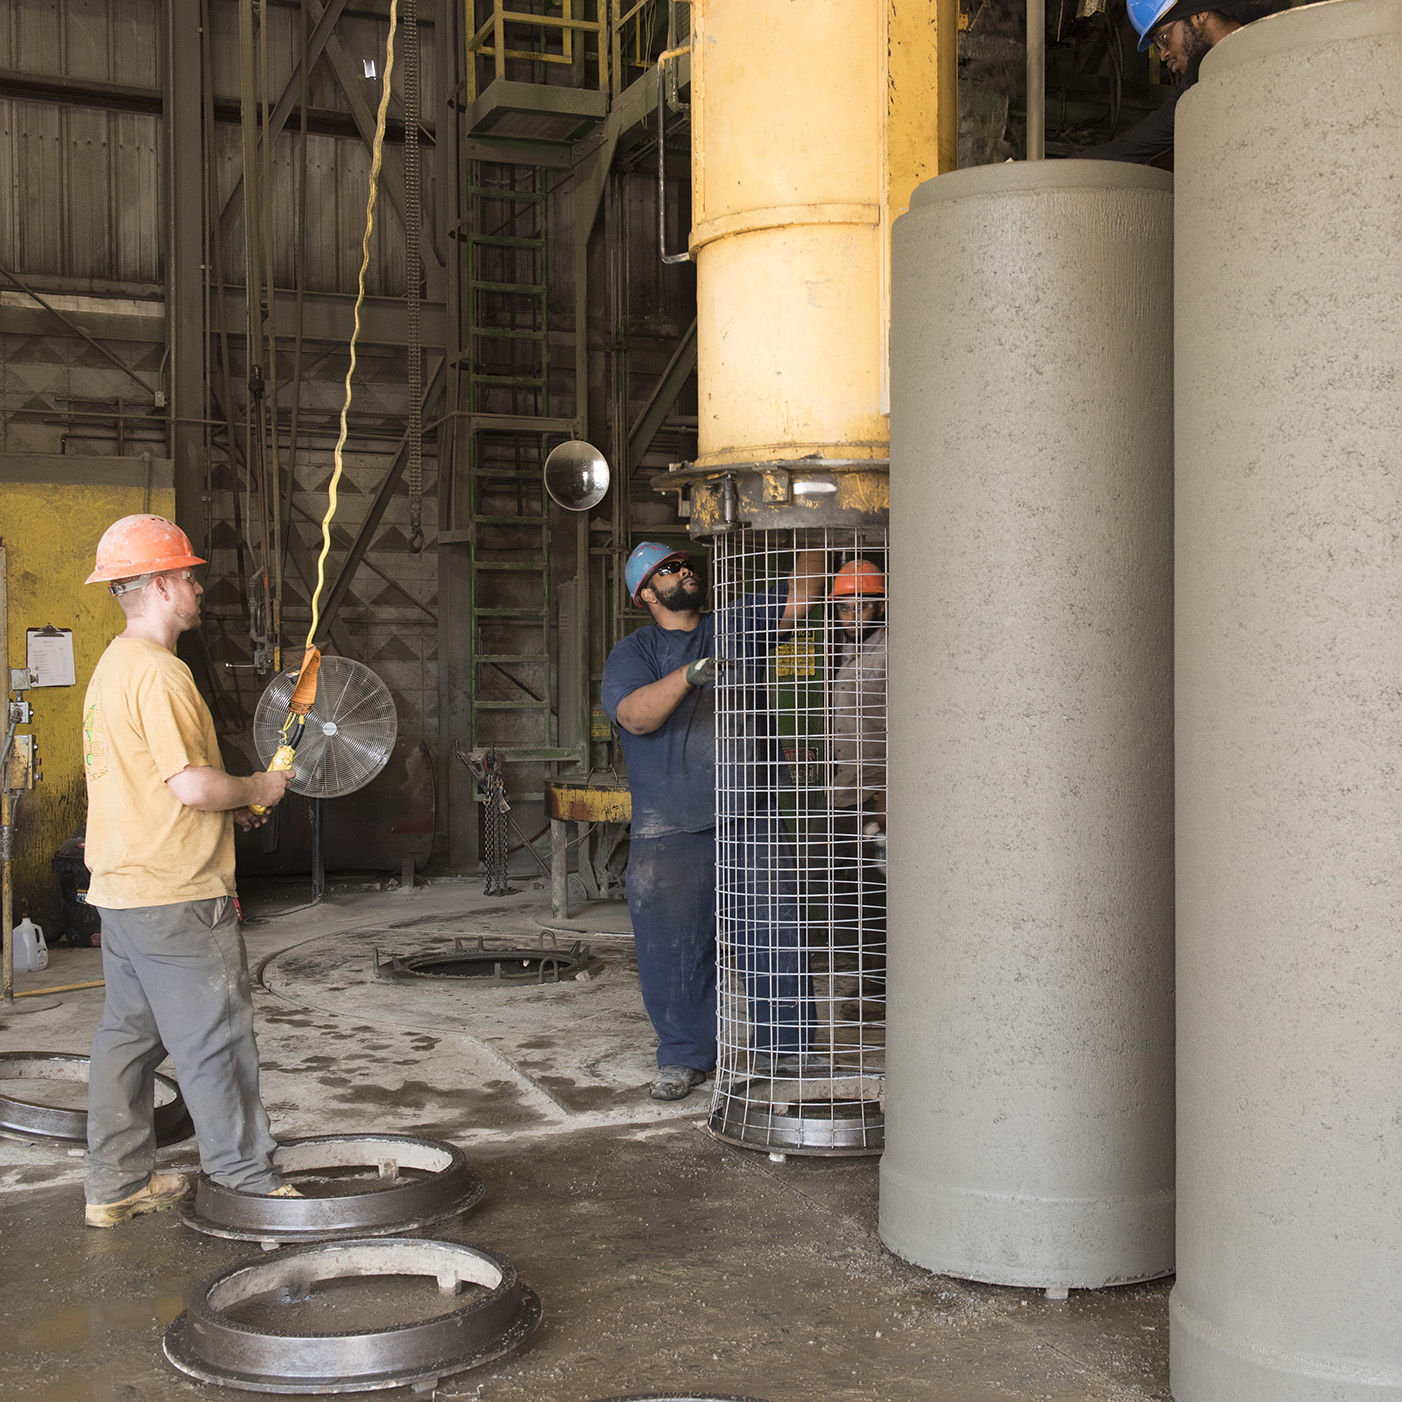 Reinforced Concrete Pipe production at the Johnson Concrete Products Pipe & Drainage Plant in Salisbury, NC